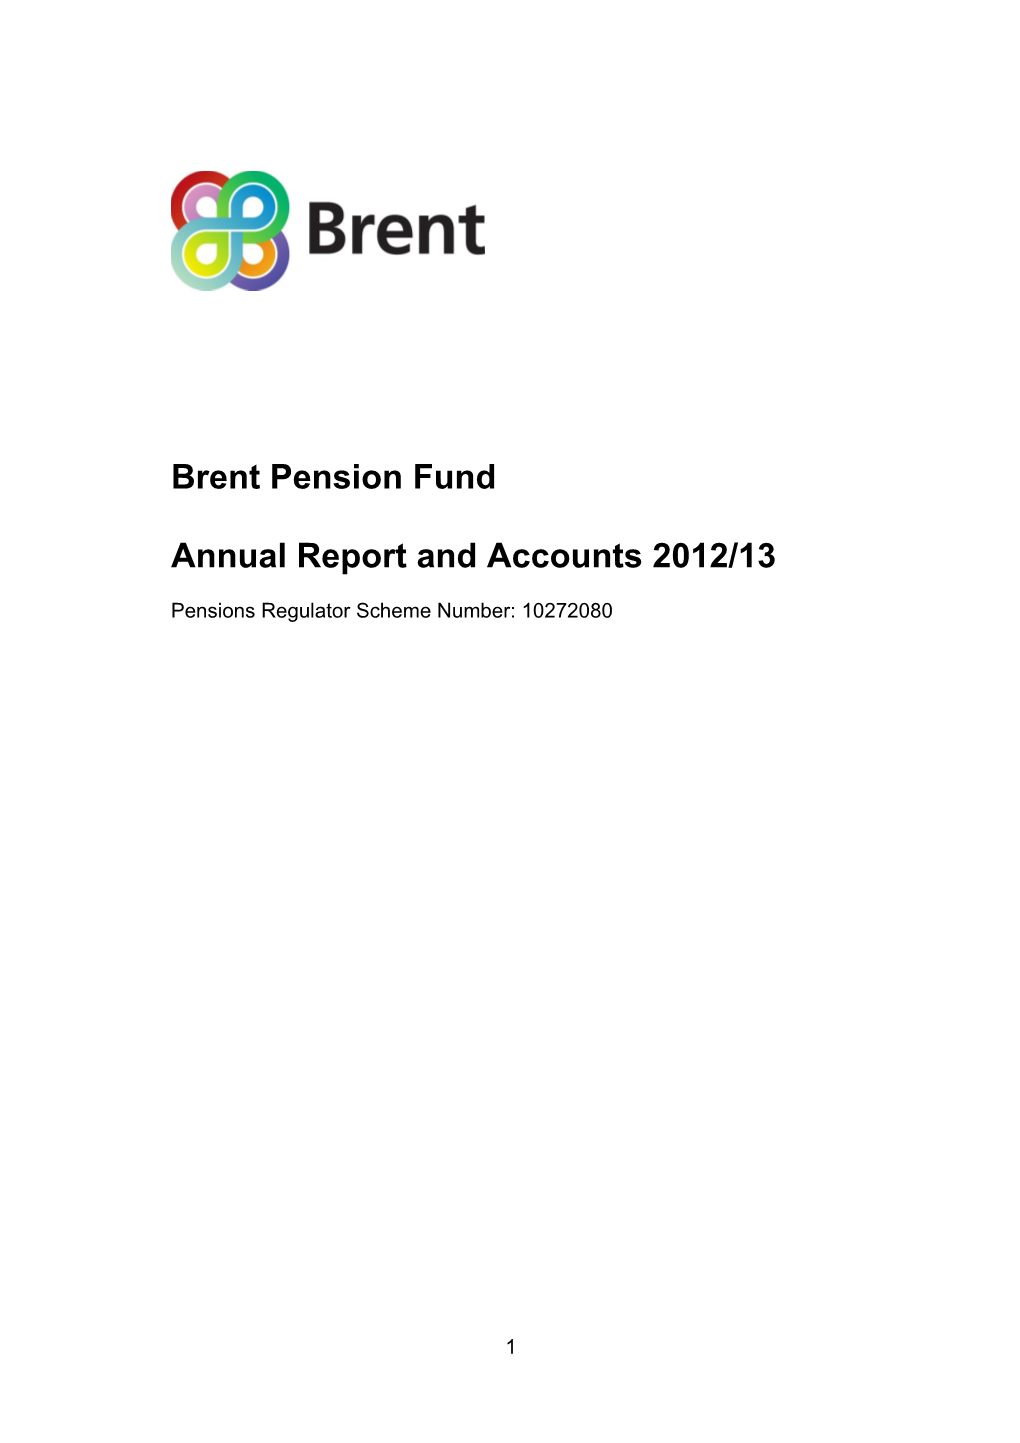 Pension Fund Accounts